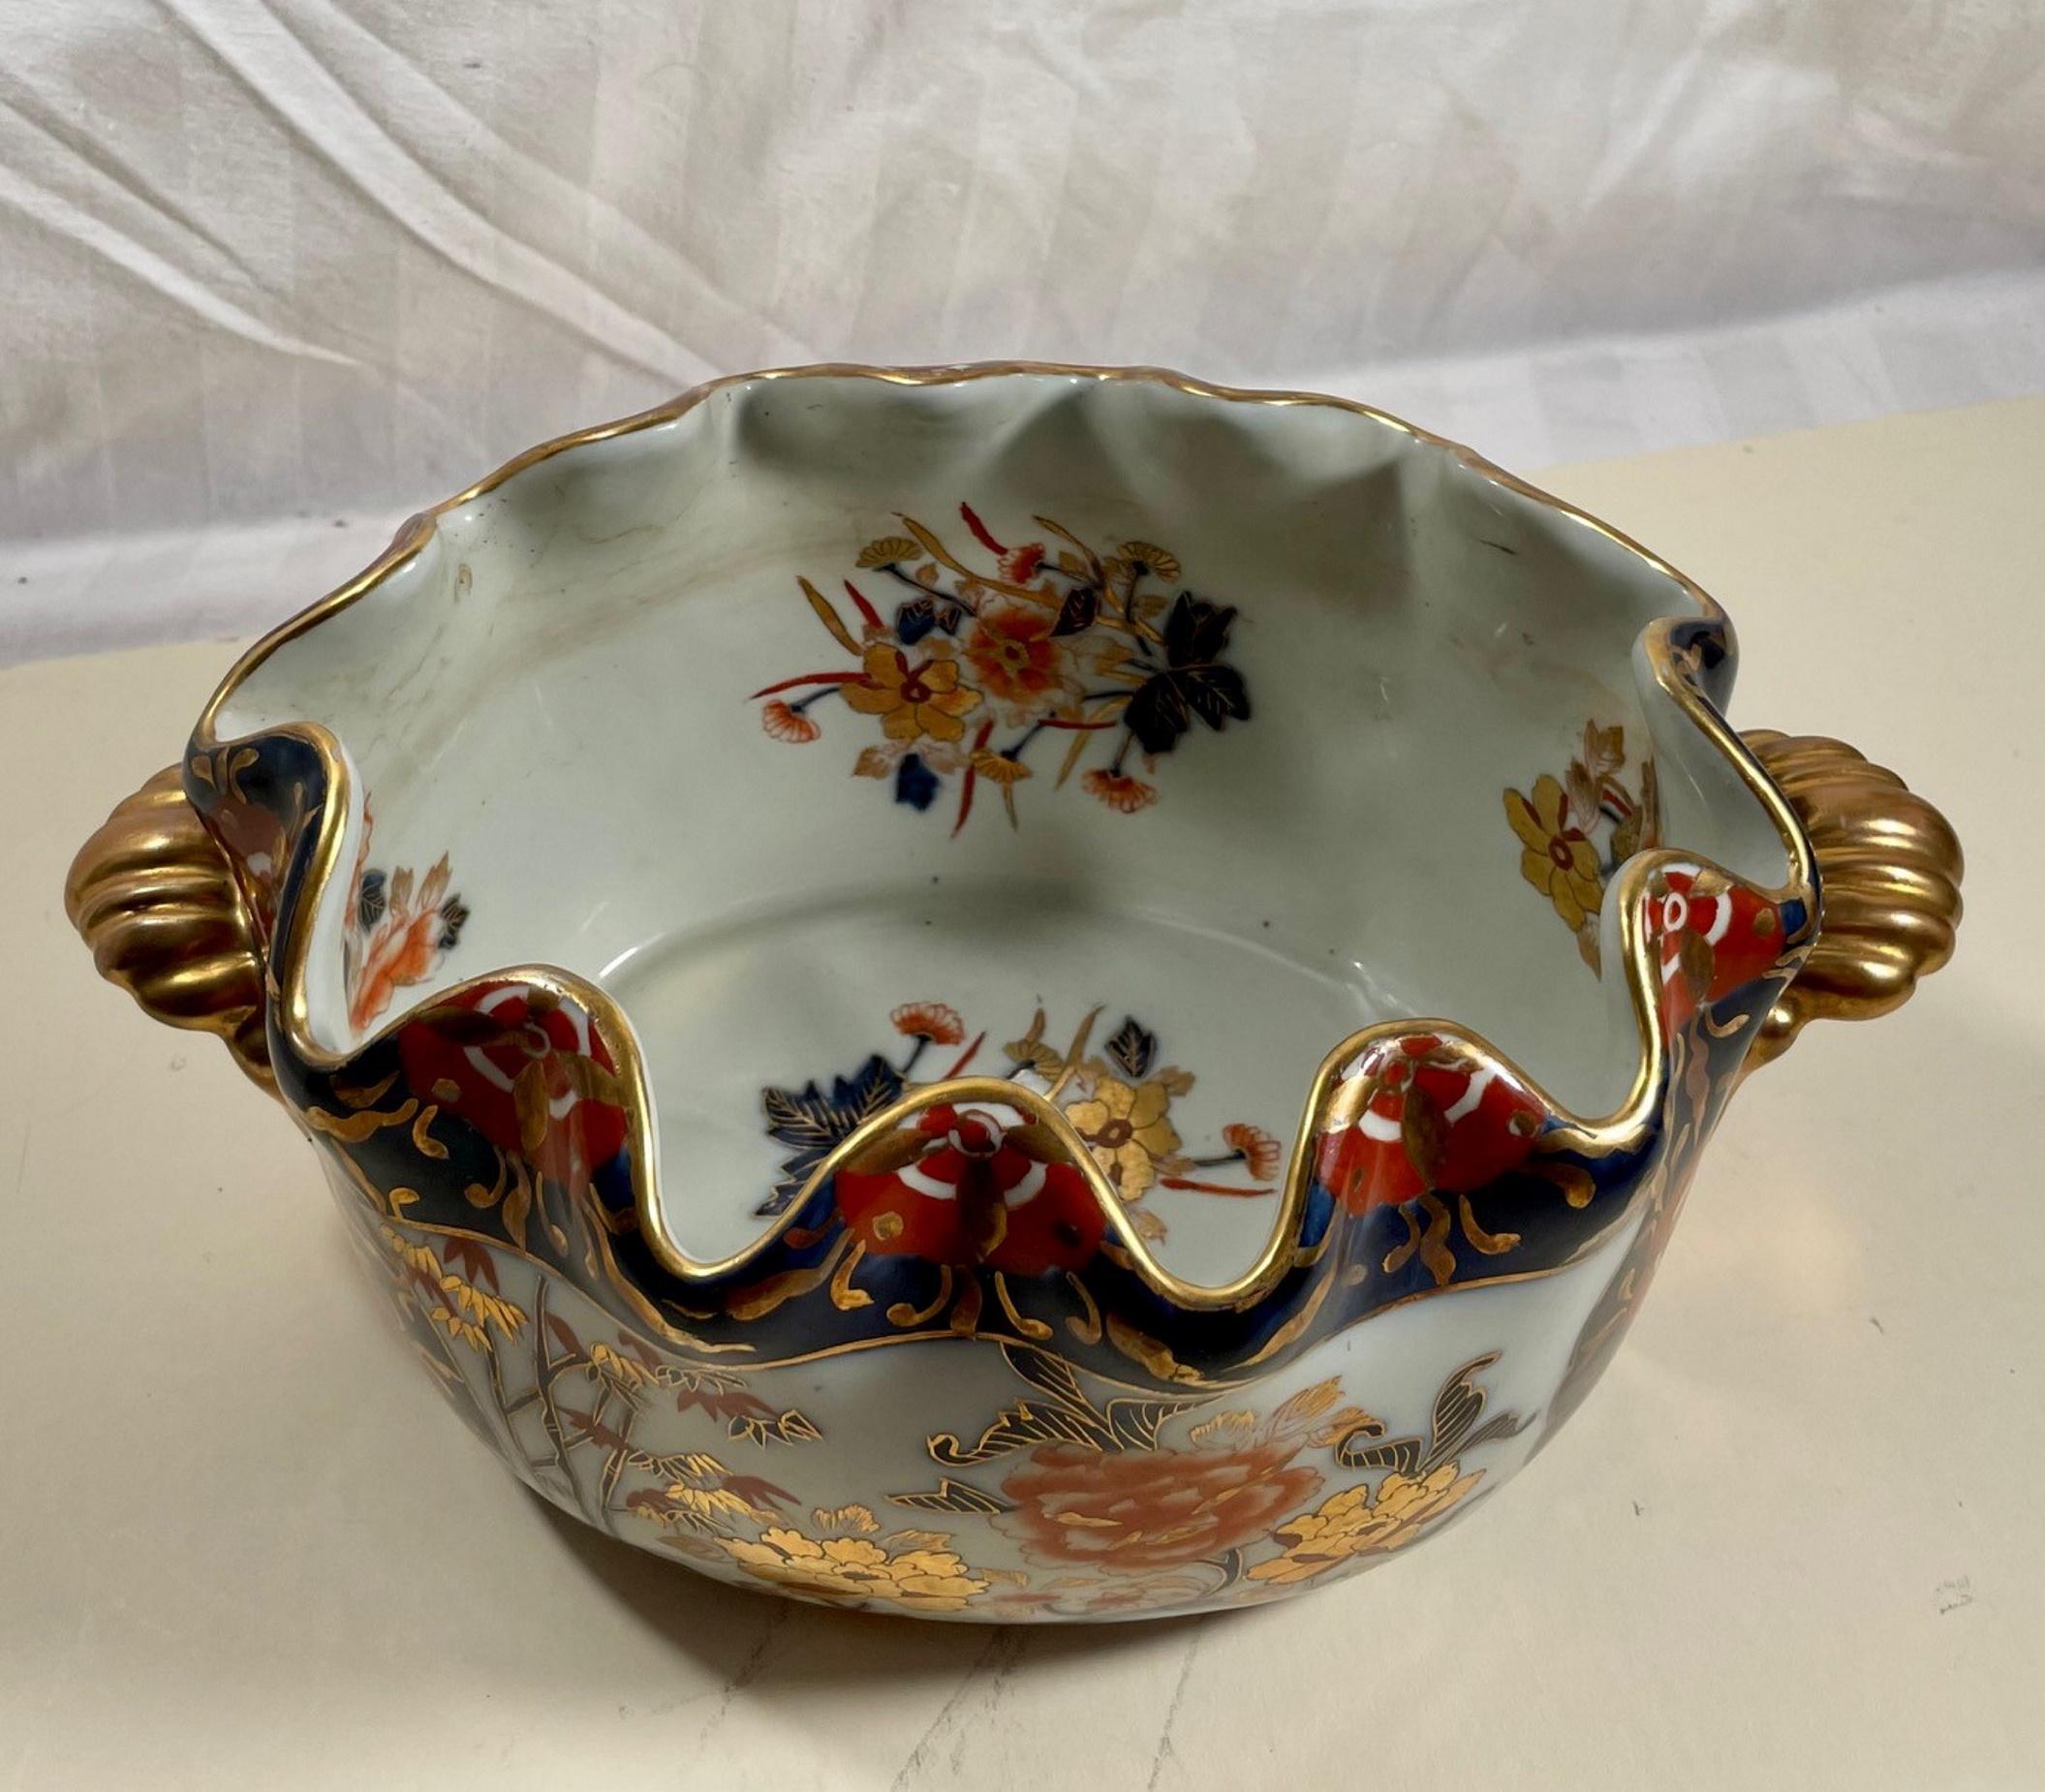 19th Century English Mason’s ironstone imari style deep blue bowl with gilt flower decoration.

Superb ironstone bowl hand painted with bold enamels of Cobalt Blue, burnt orange and strong applied gilded highlights. This bowl was made by Mason’s